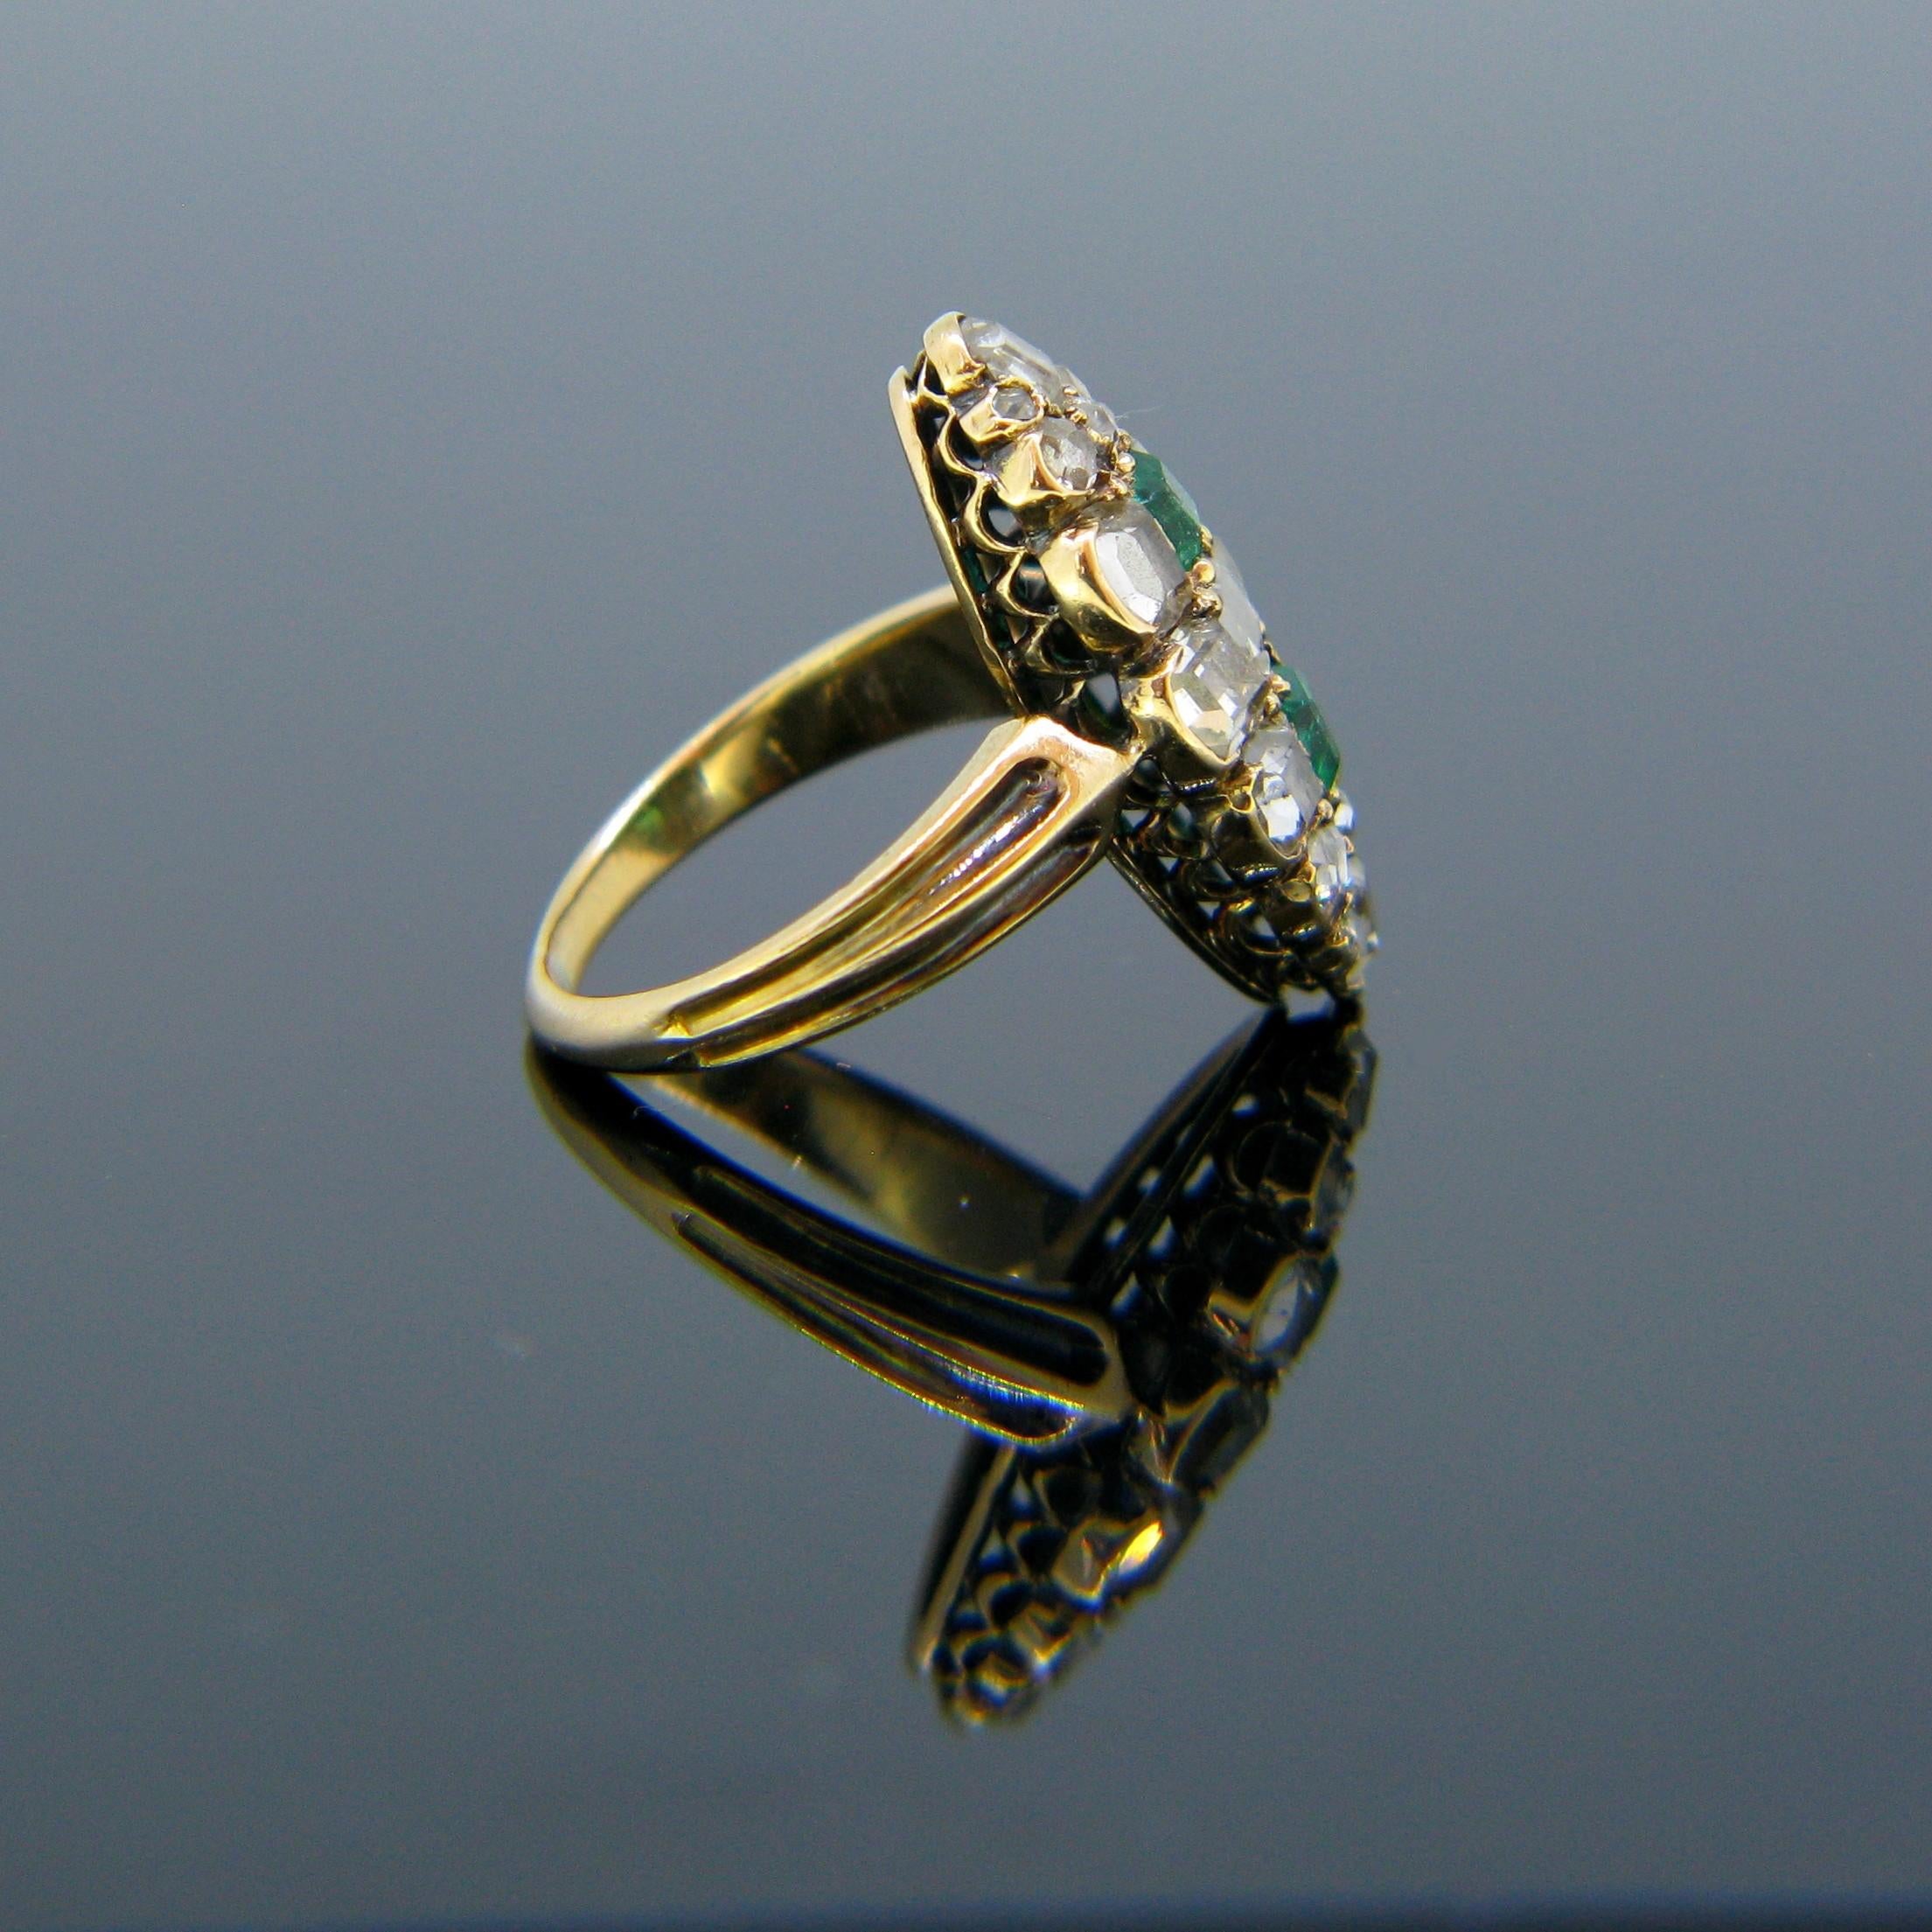 This antique ring is directly from the Georgian era. It is in the shape of a marquise and is set with two square emeralds and 18 table cut and rose cut diamonds foiled back. The ring is fully made in 18kt gold – not marked but tested. This ring is